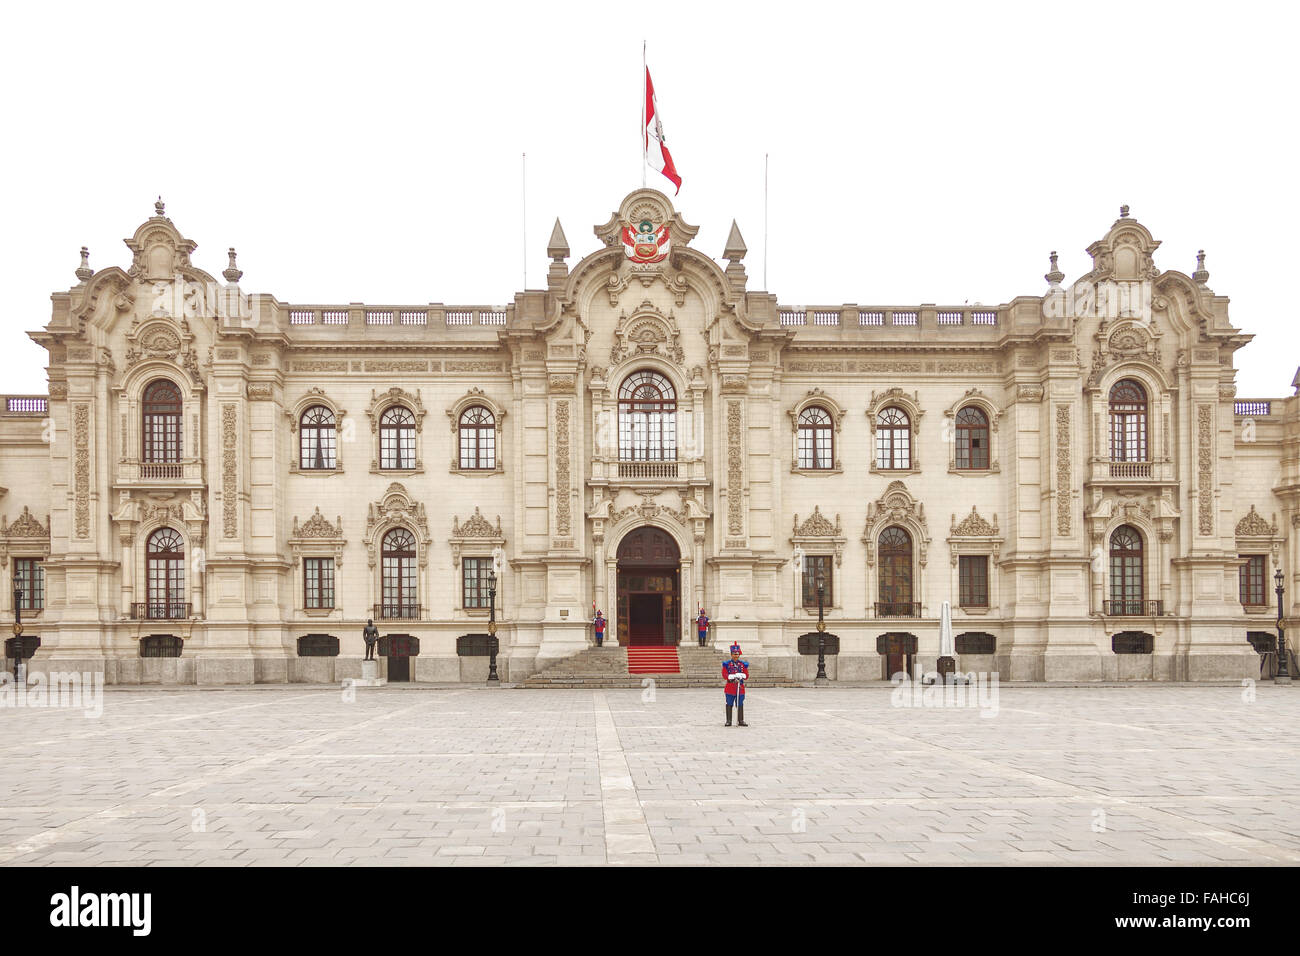 LIMA, PERU - OCTOBER 31, 2011: Government palace with guards at Plaza de Armas in Lima, Peru. It is the birthplace of the city o Stock Photo